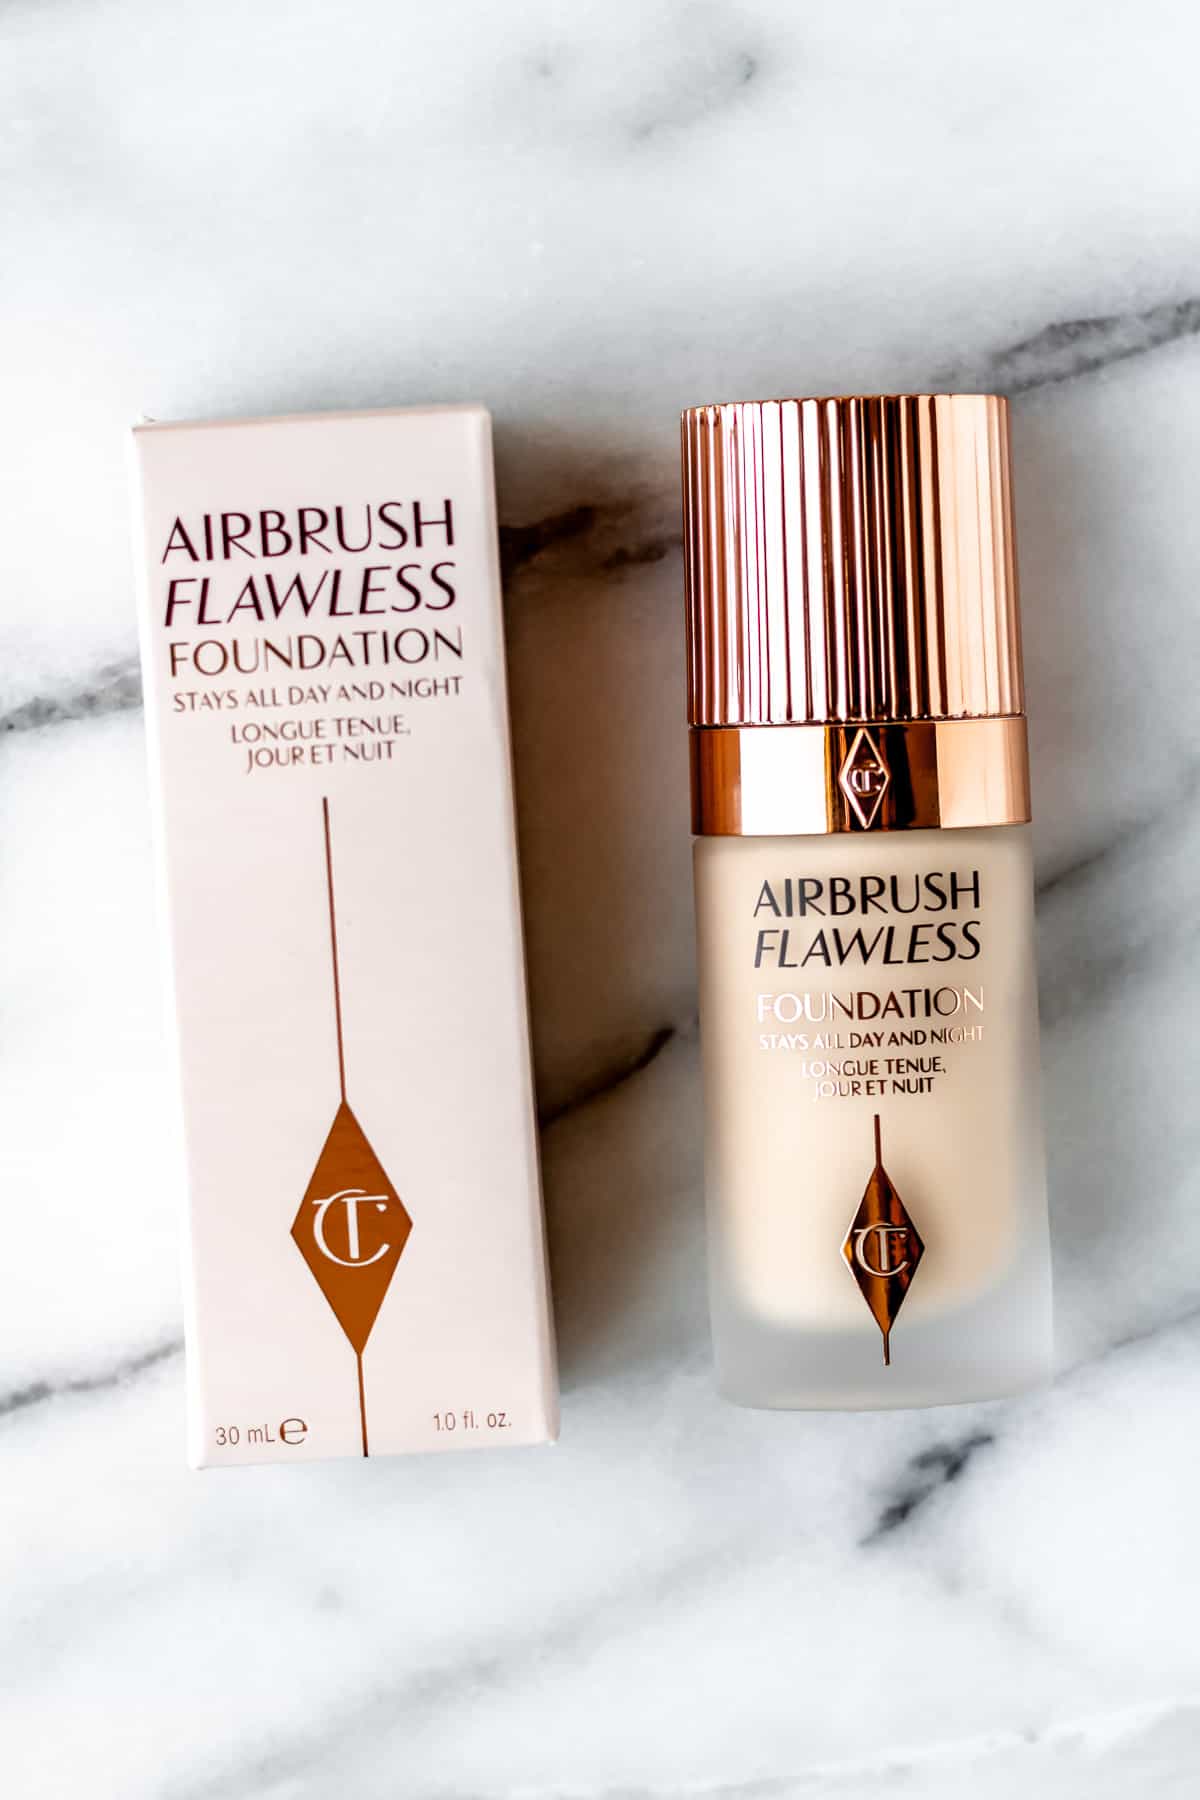 Charlotte Tilbury Airbrush Flawless Foundation packaging and bottle on a marble background.